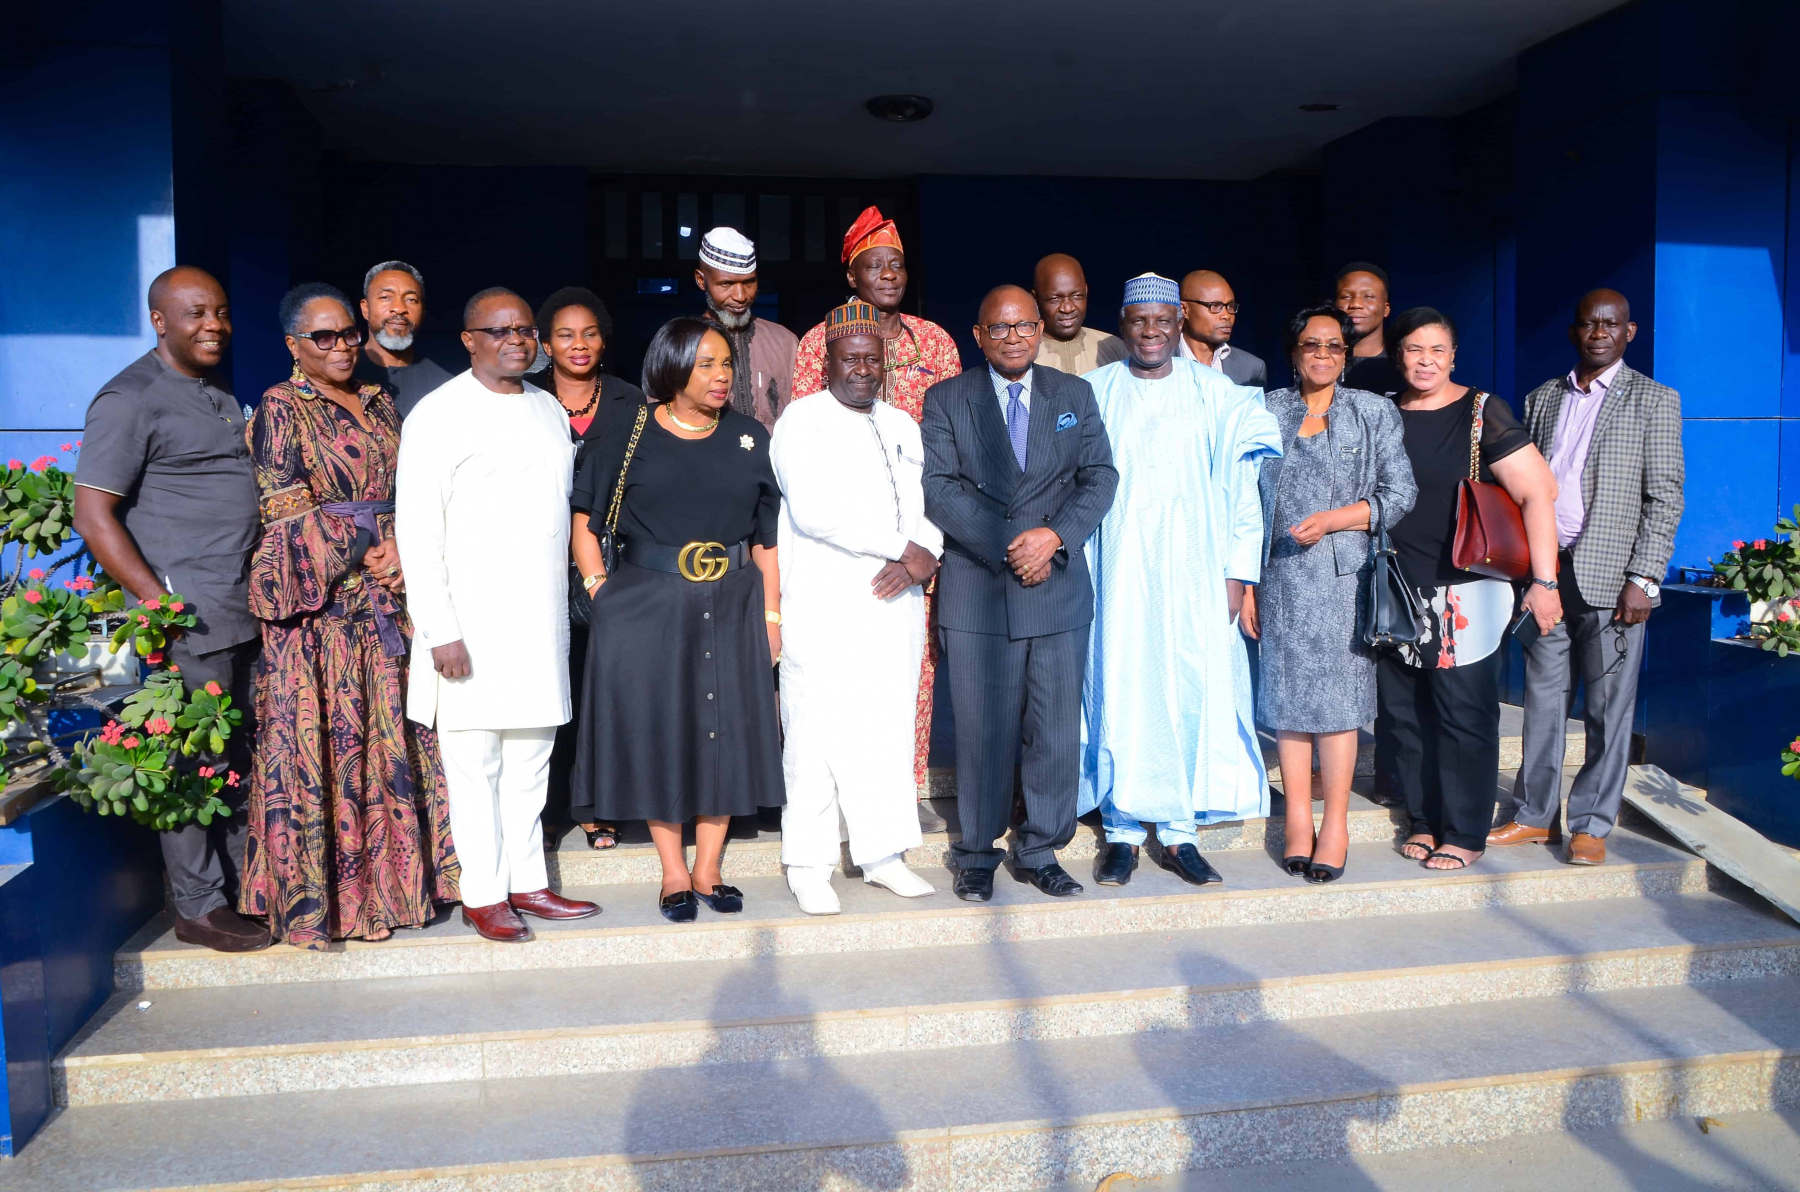 The-Governing-Board-of-NPL-and-Leadership-of-NAN-smile-for-the-camera